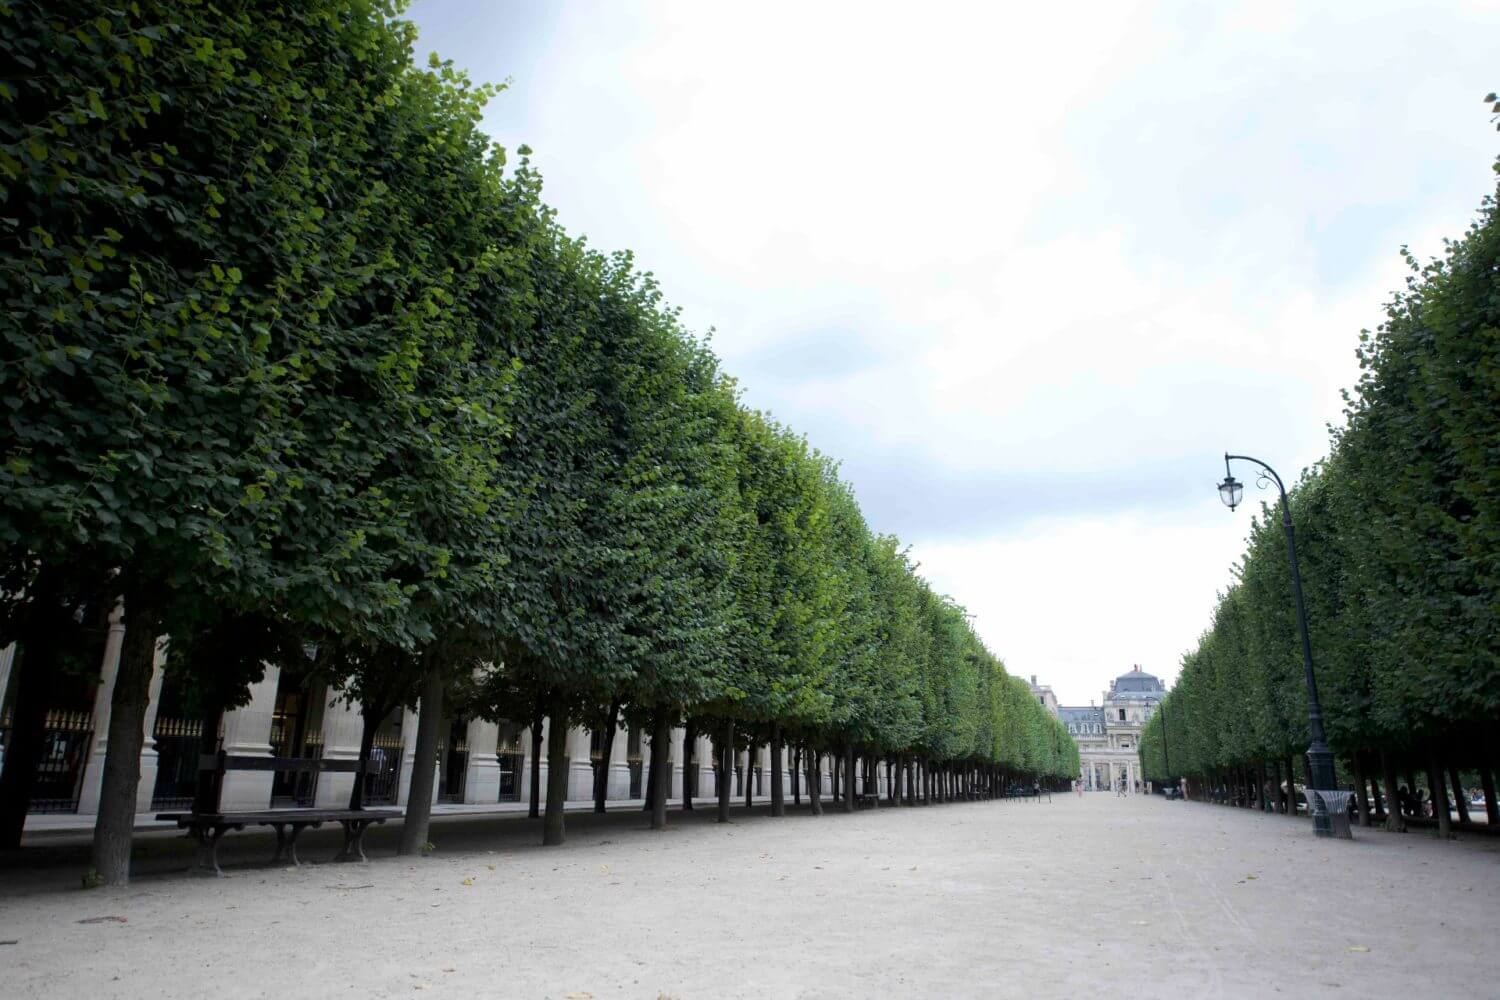 Gardens of the Palais-Royal - Photo credit: Fantrippers